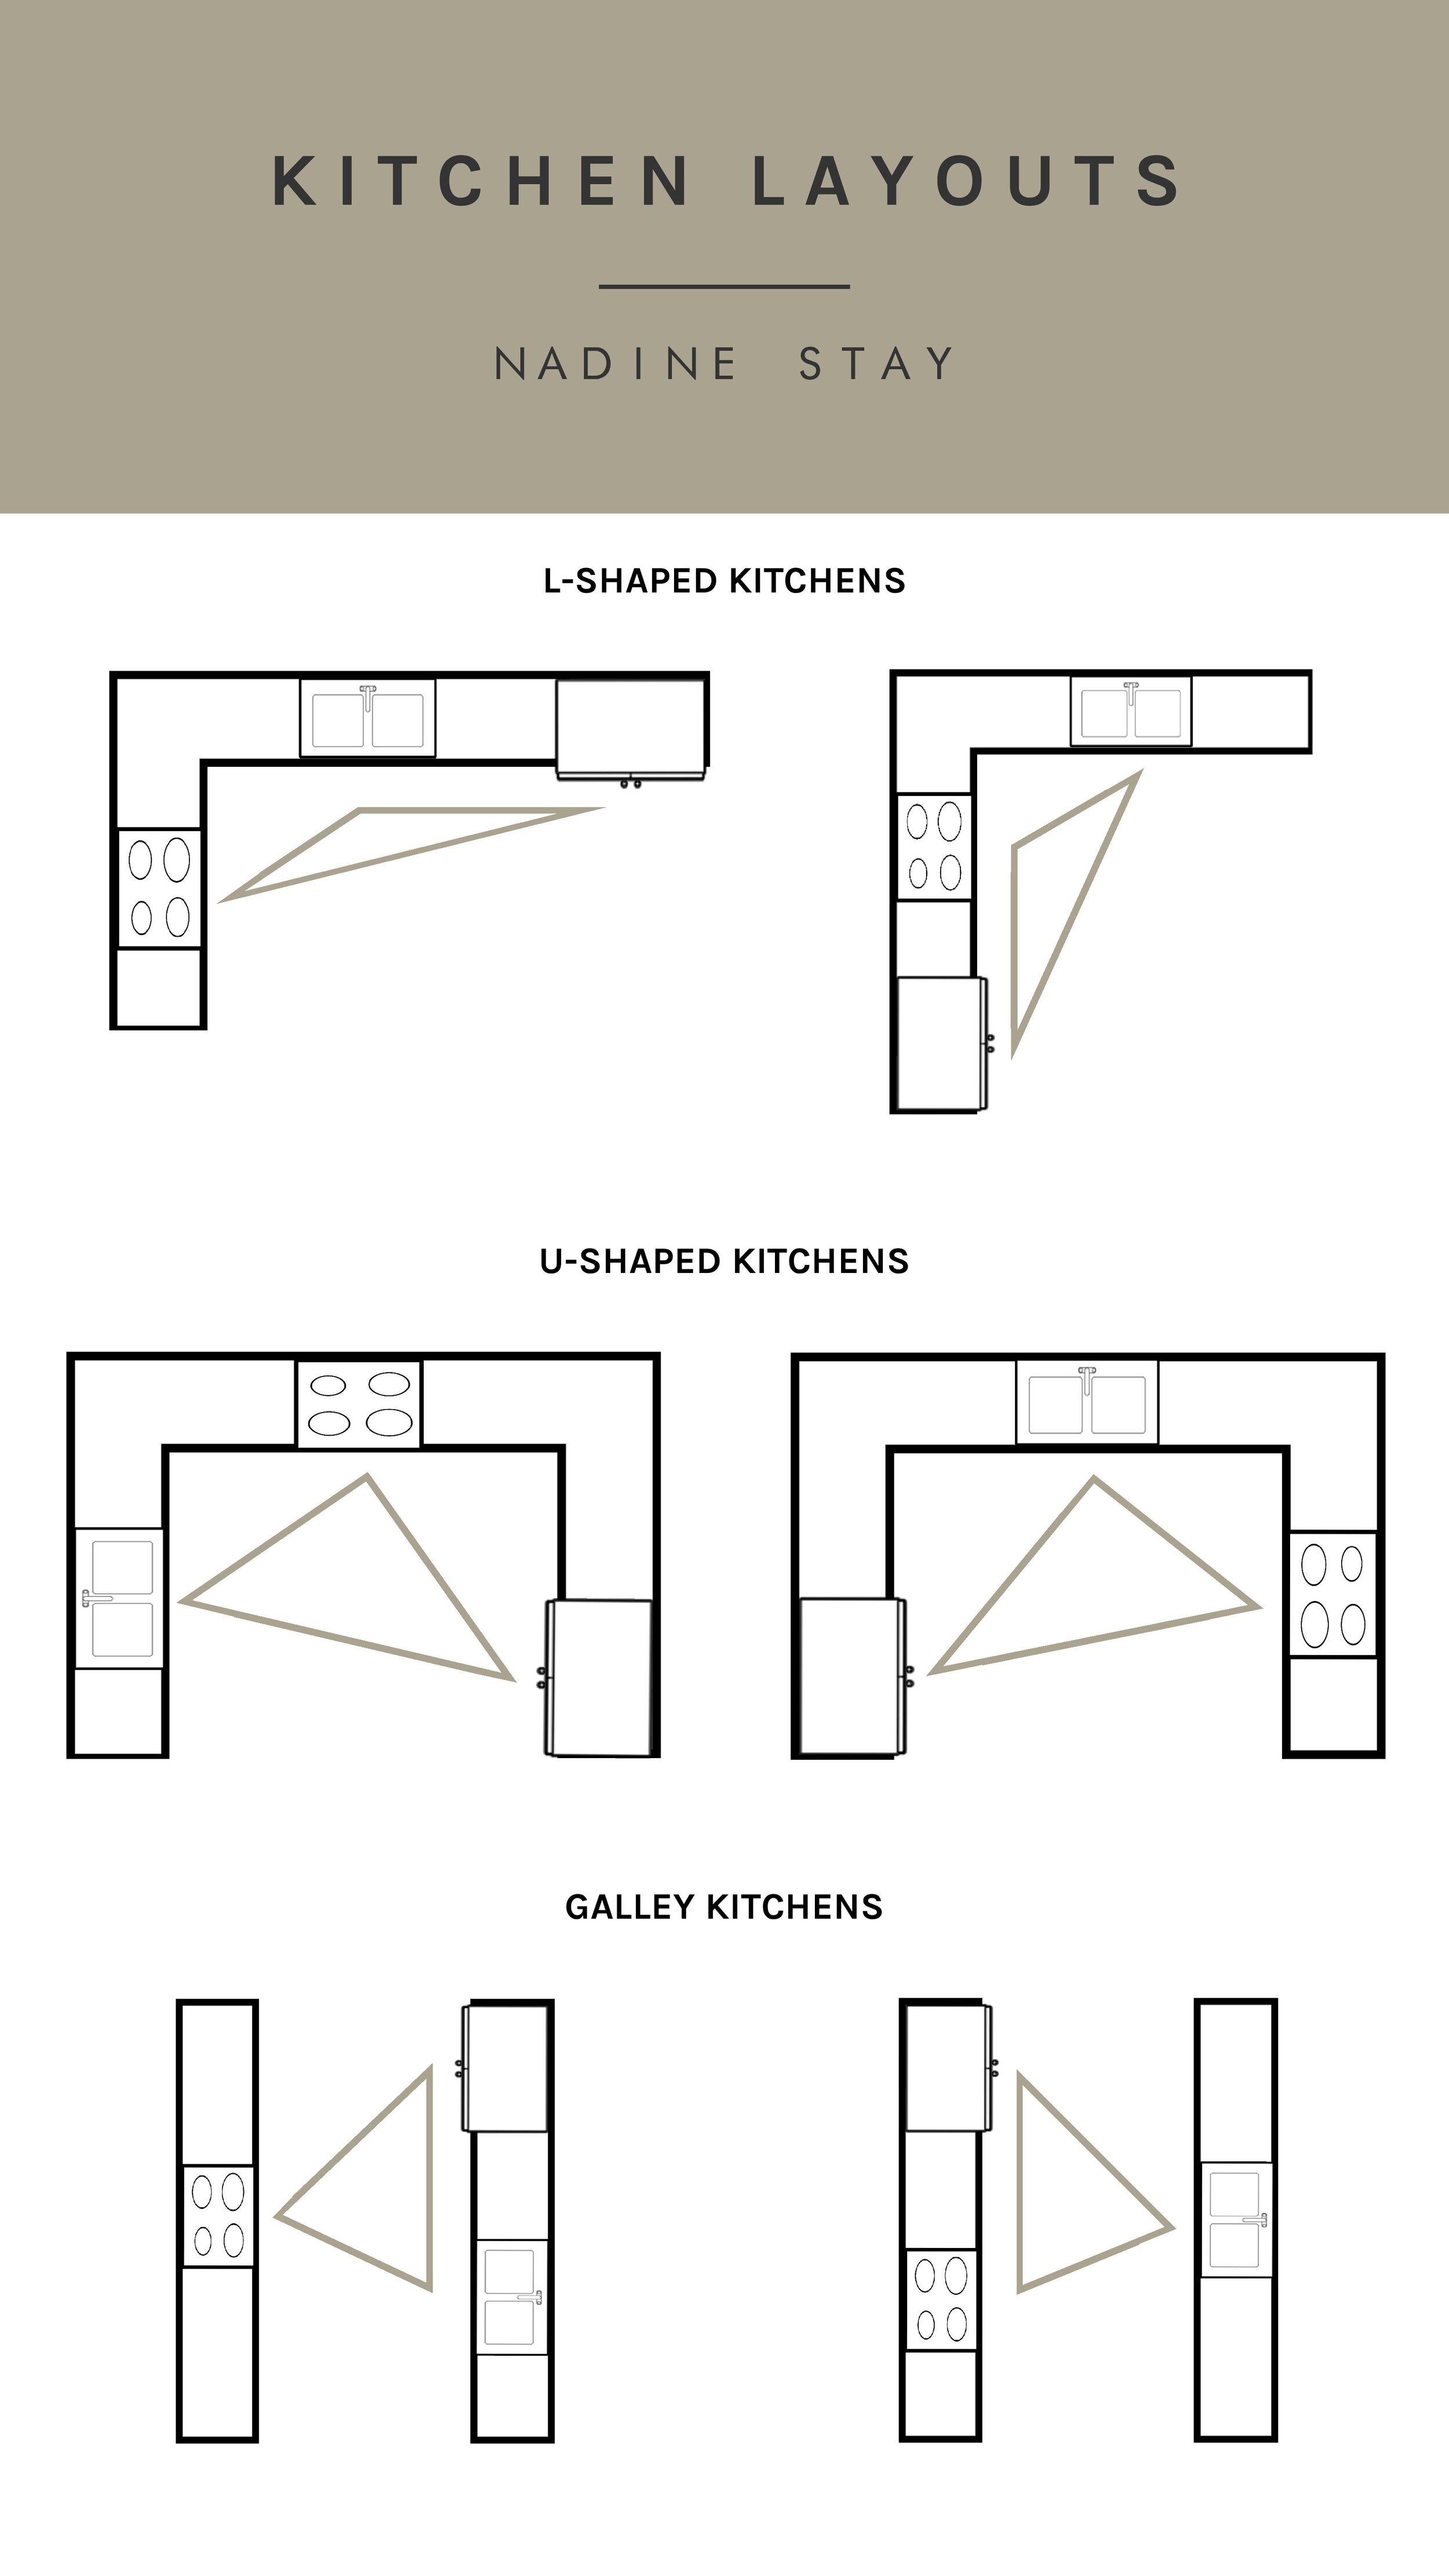 Designers Secret The 1 Tip For Creating An Efficient Kitchen Layout Nadine Stay